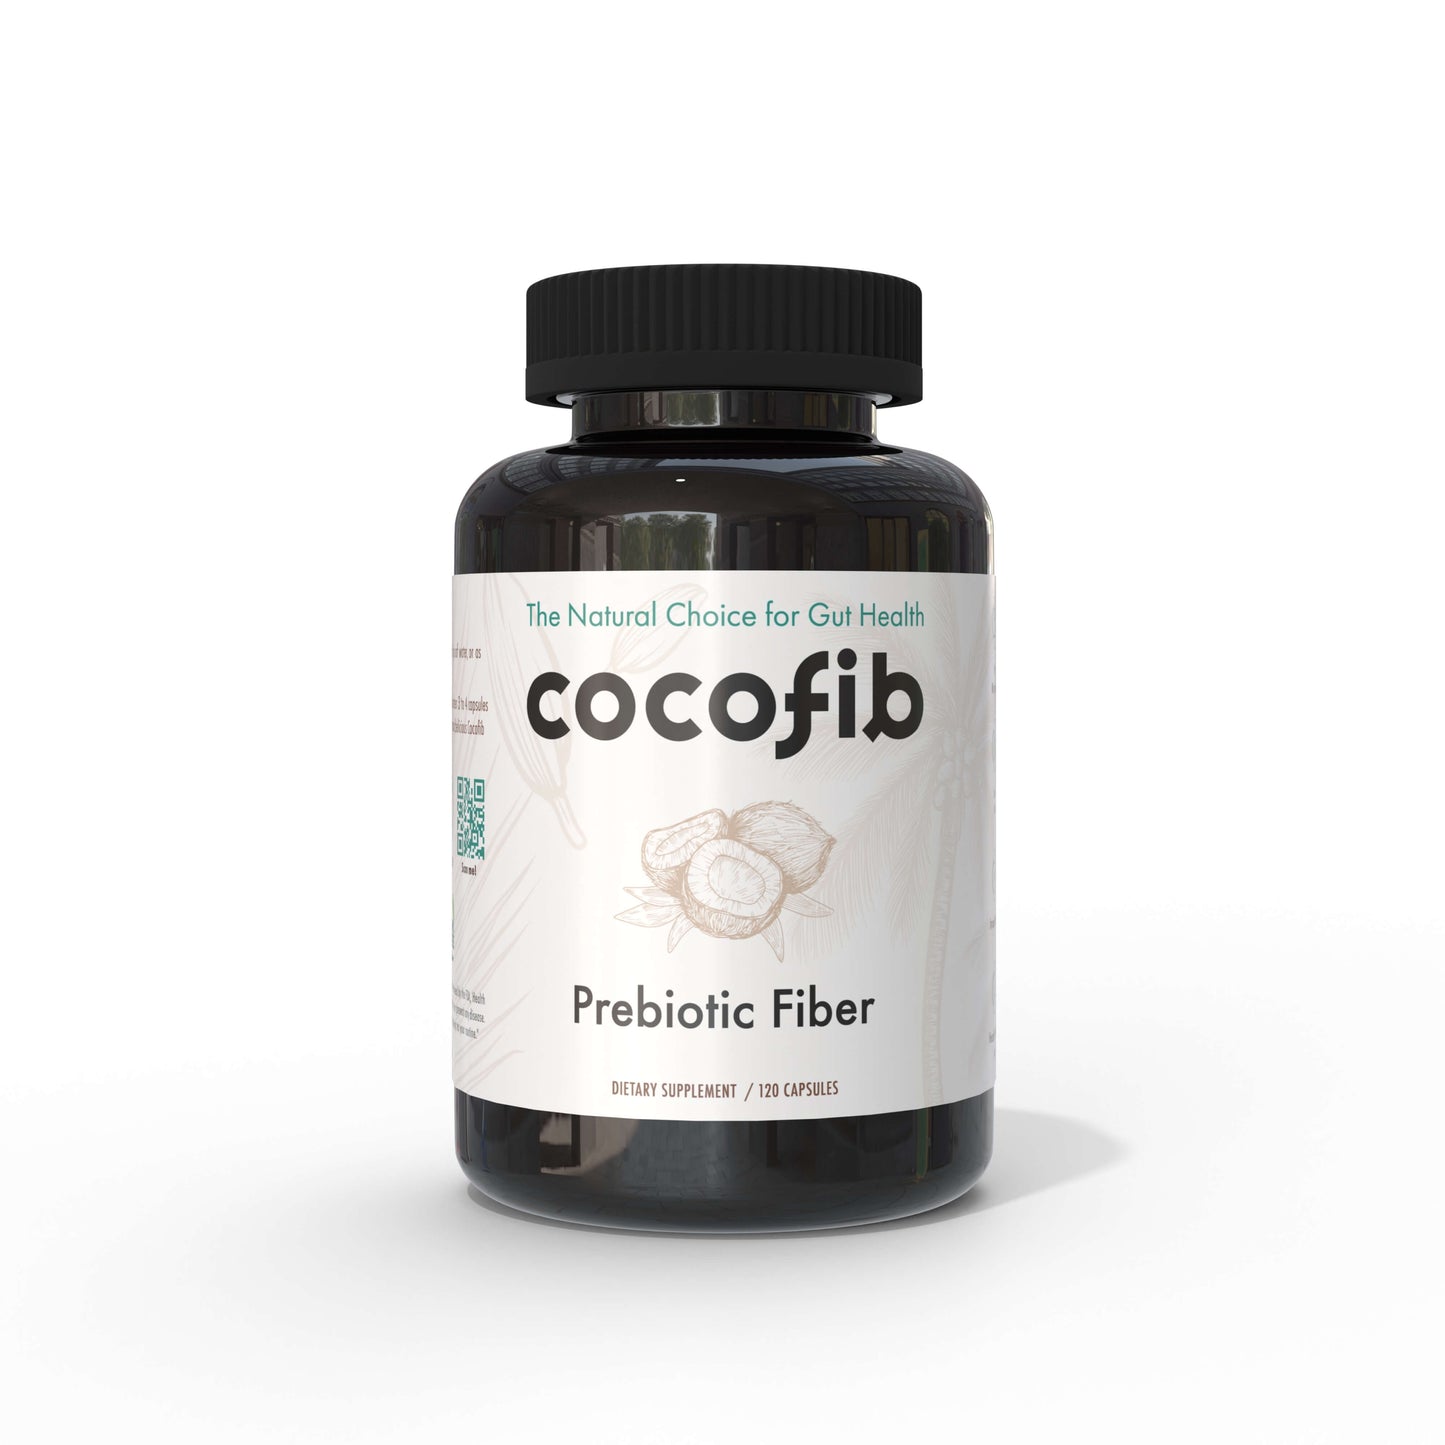 Cocofib your essential gut health supplement